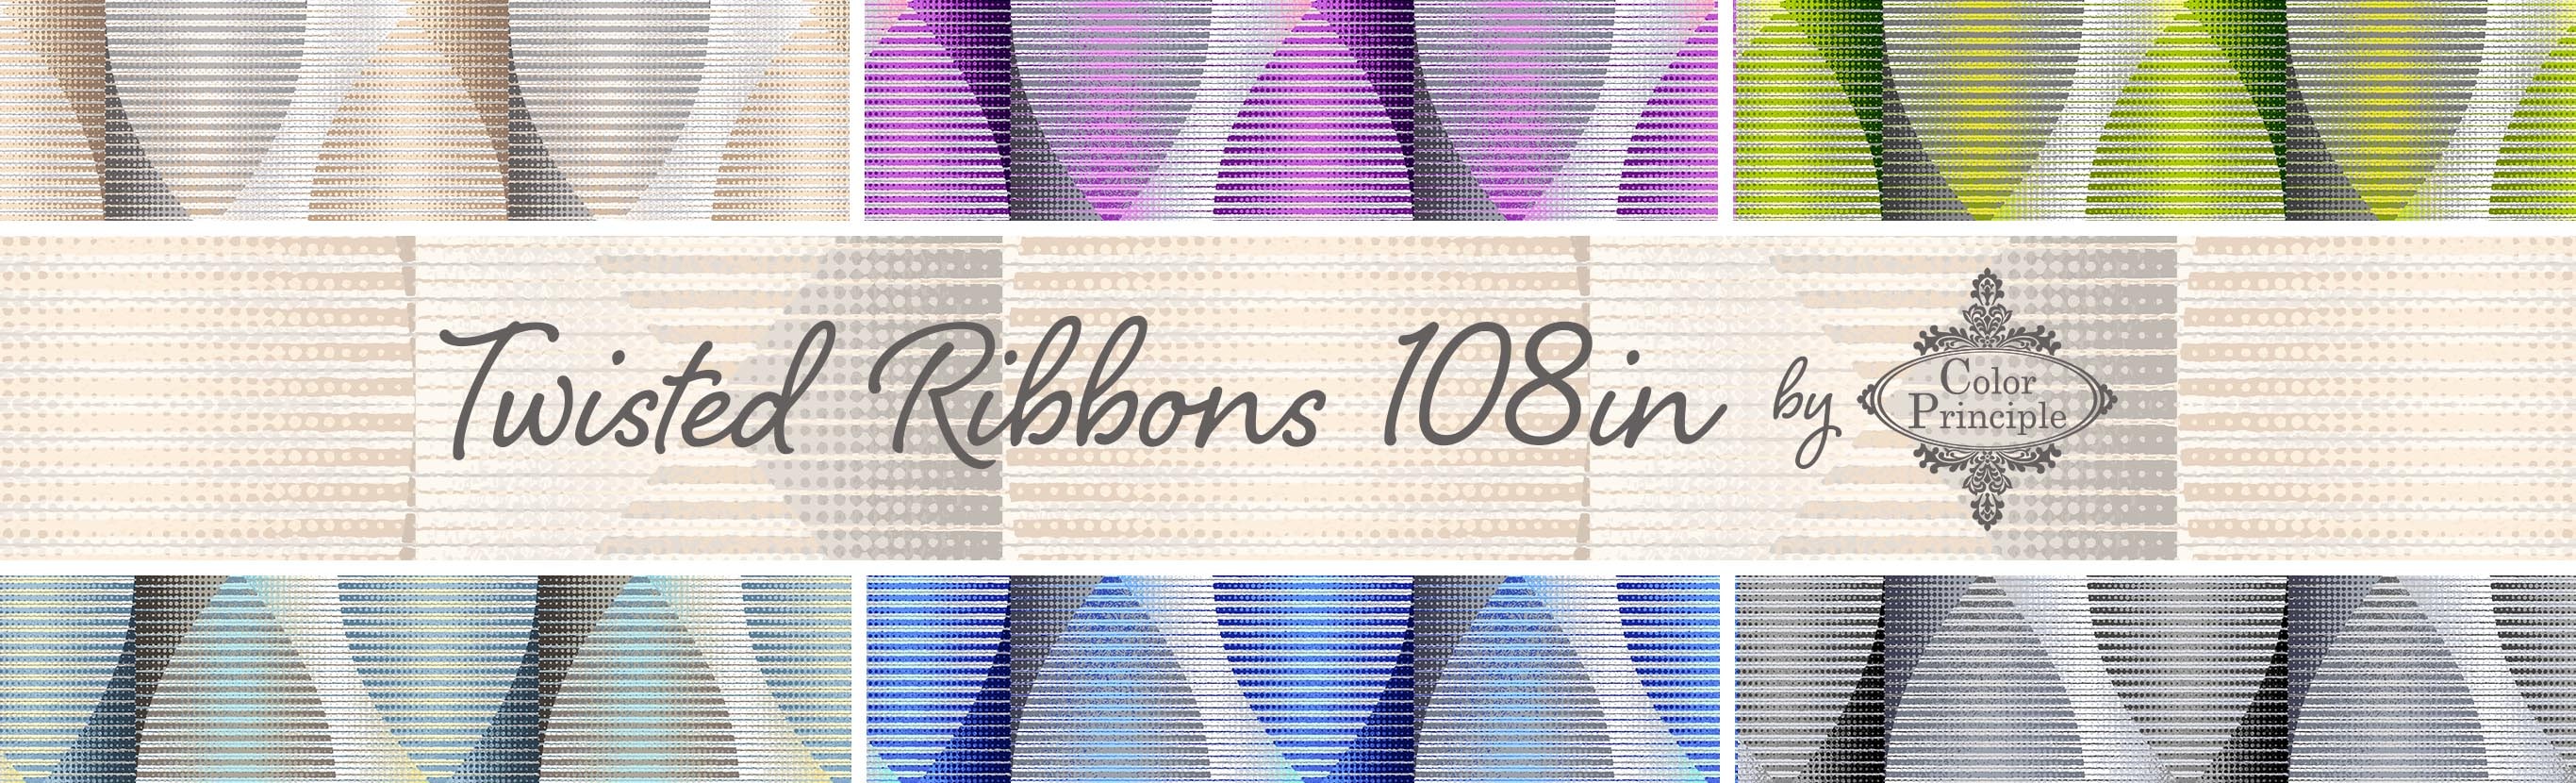 Twisted Ribbons 108